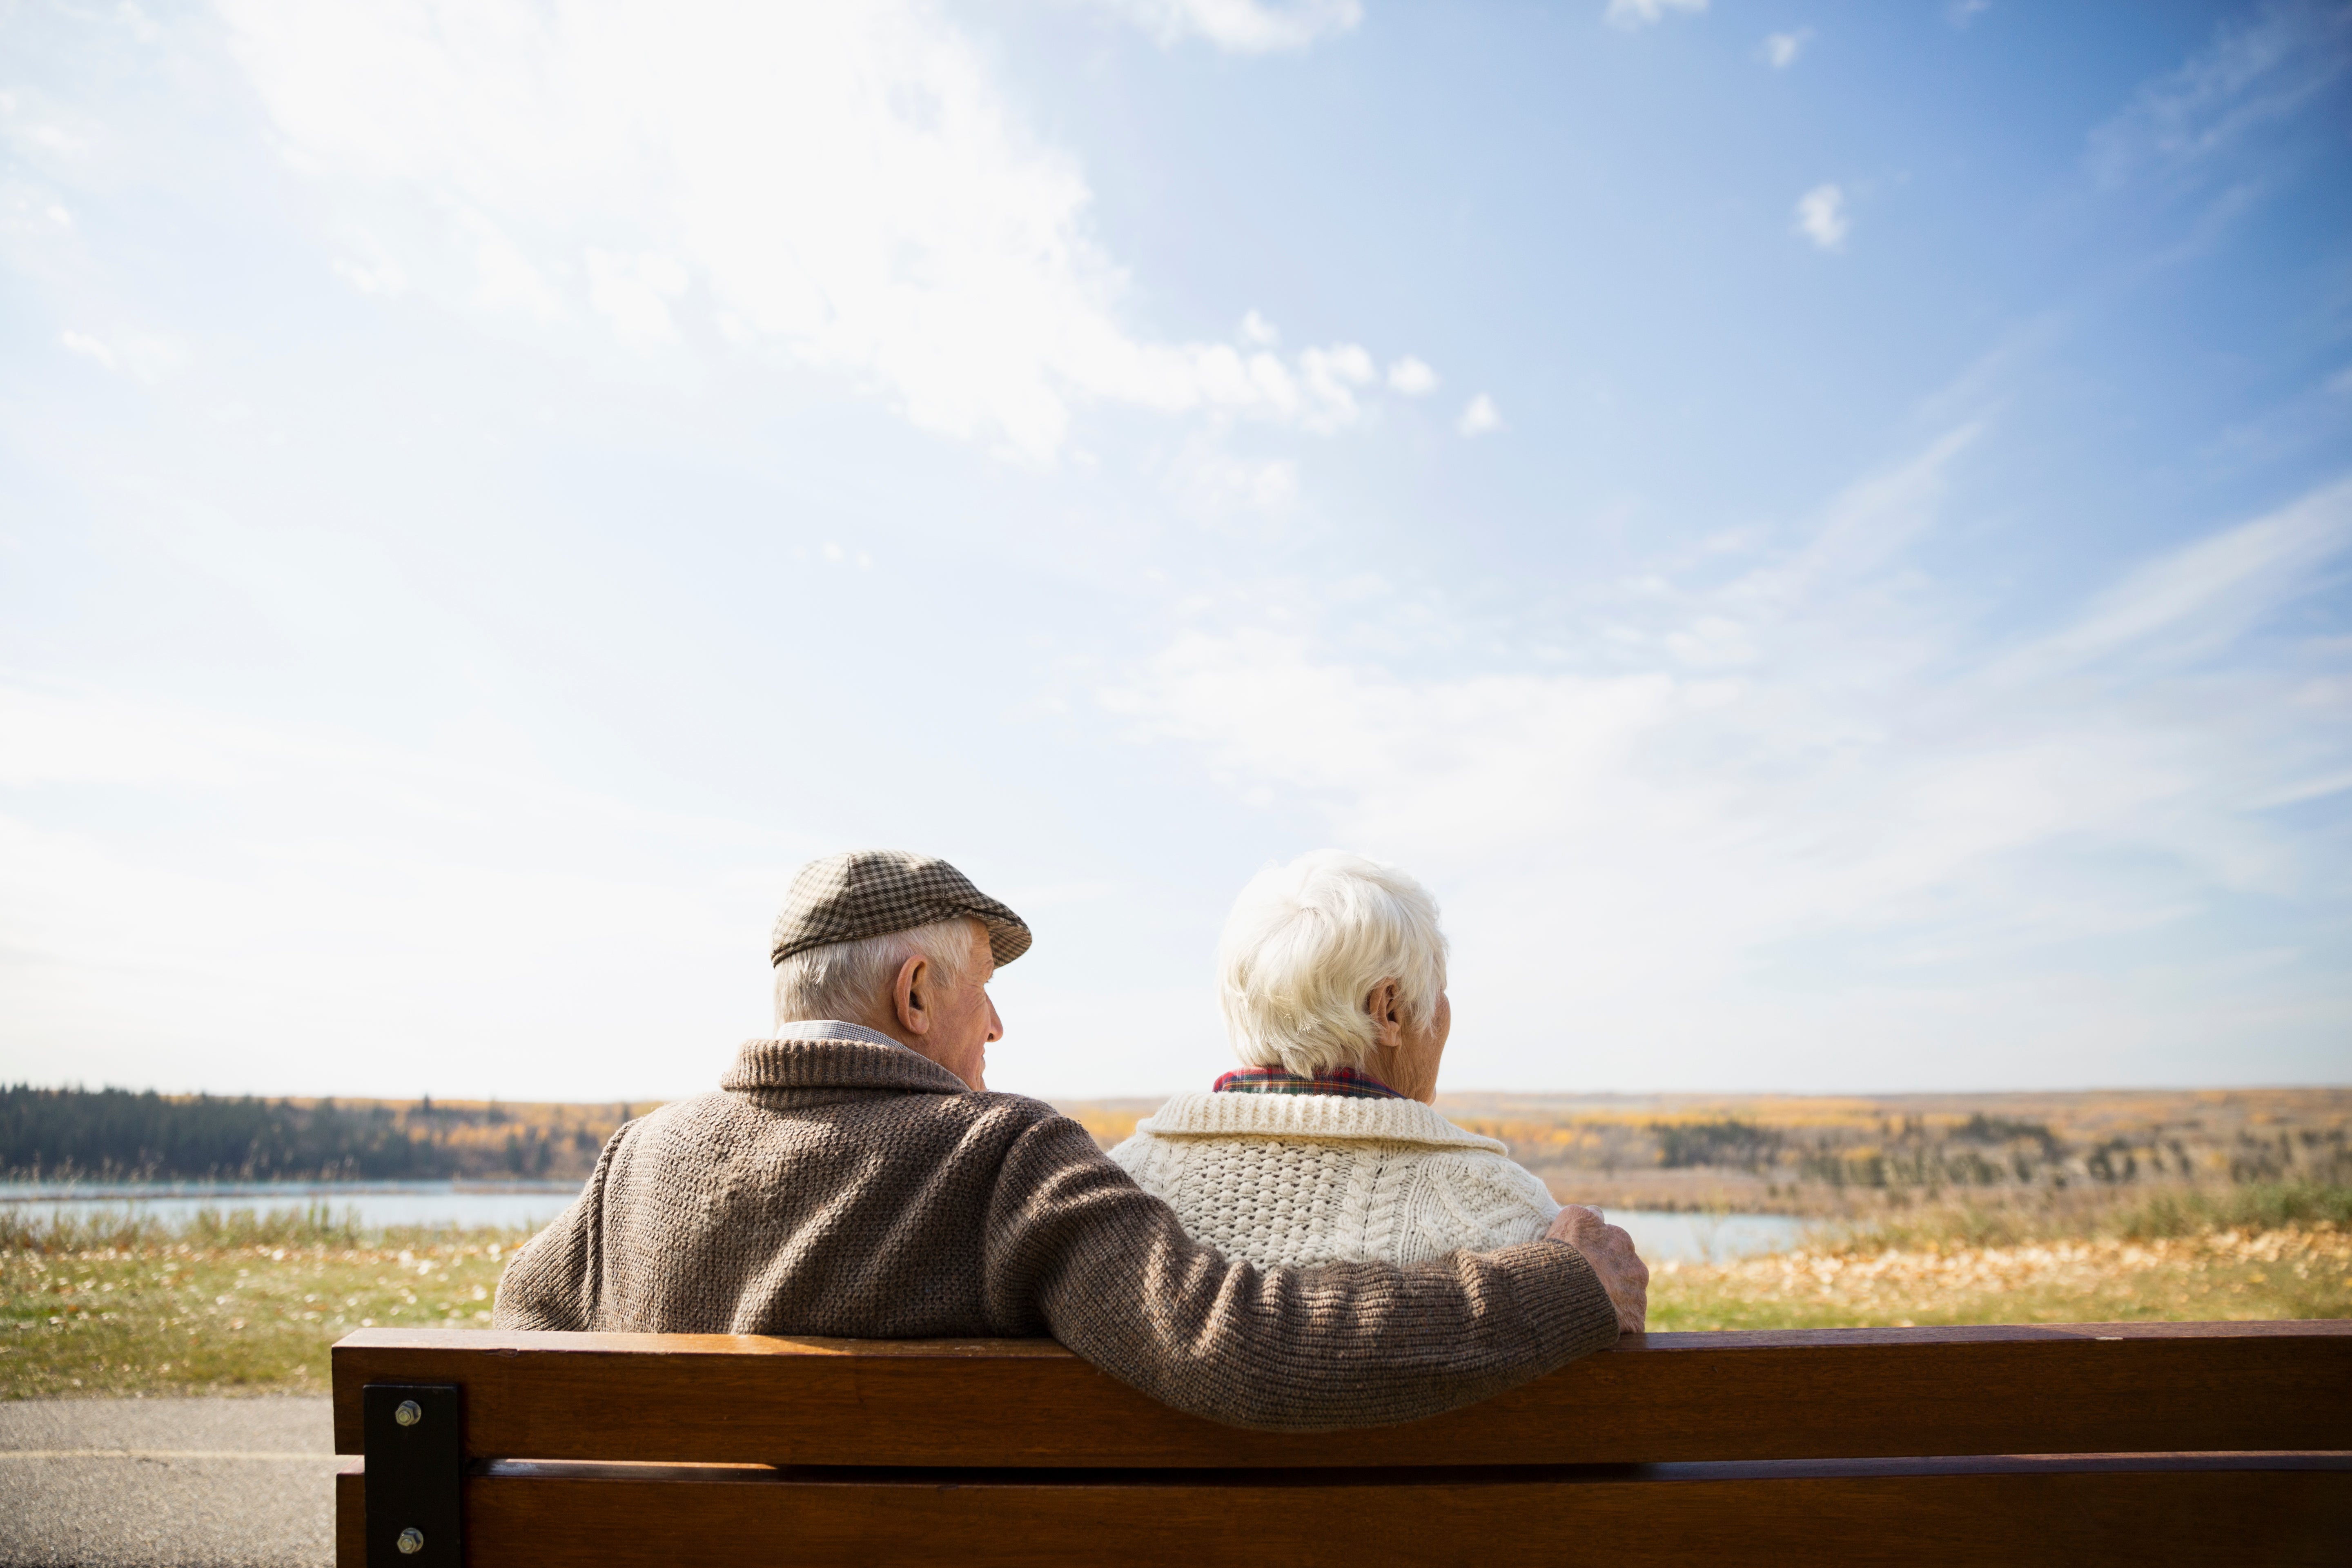 There S No Limit To Longevity Says Study Reviving Human Life Span Debate Scientific American